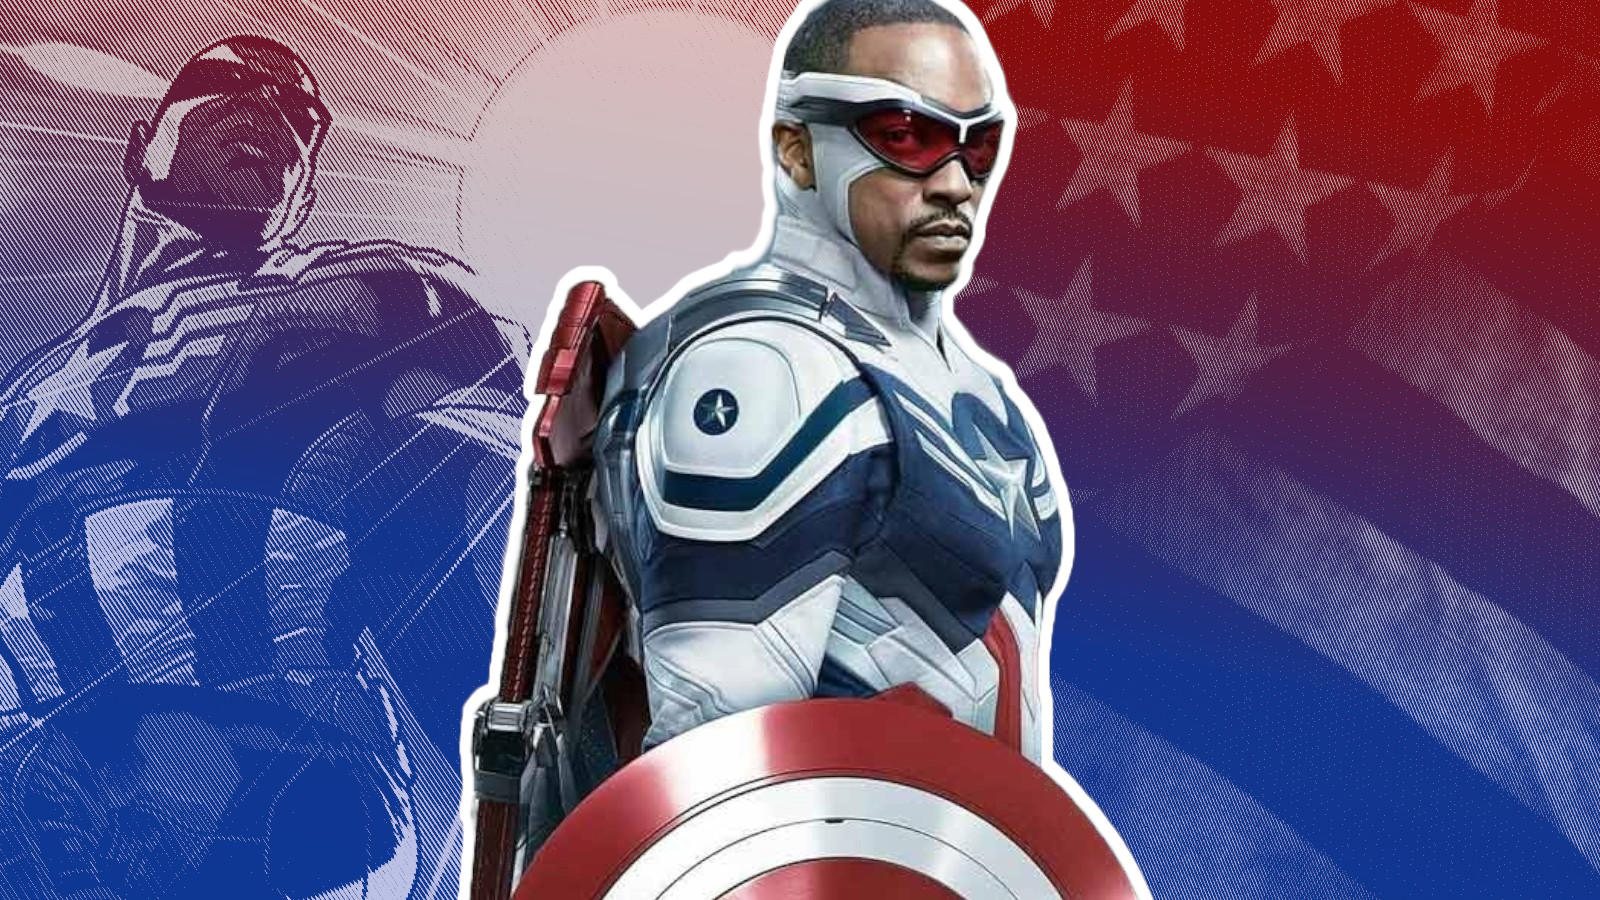 Anthony Mackie as Captain America, with a comic book background